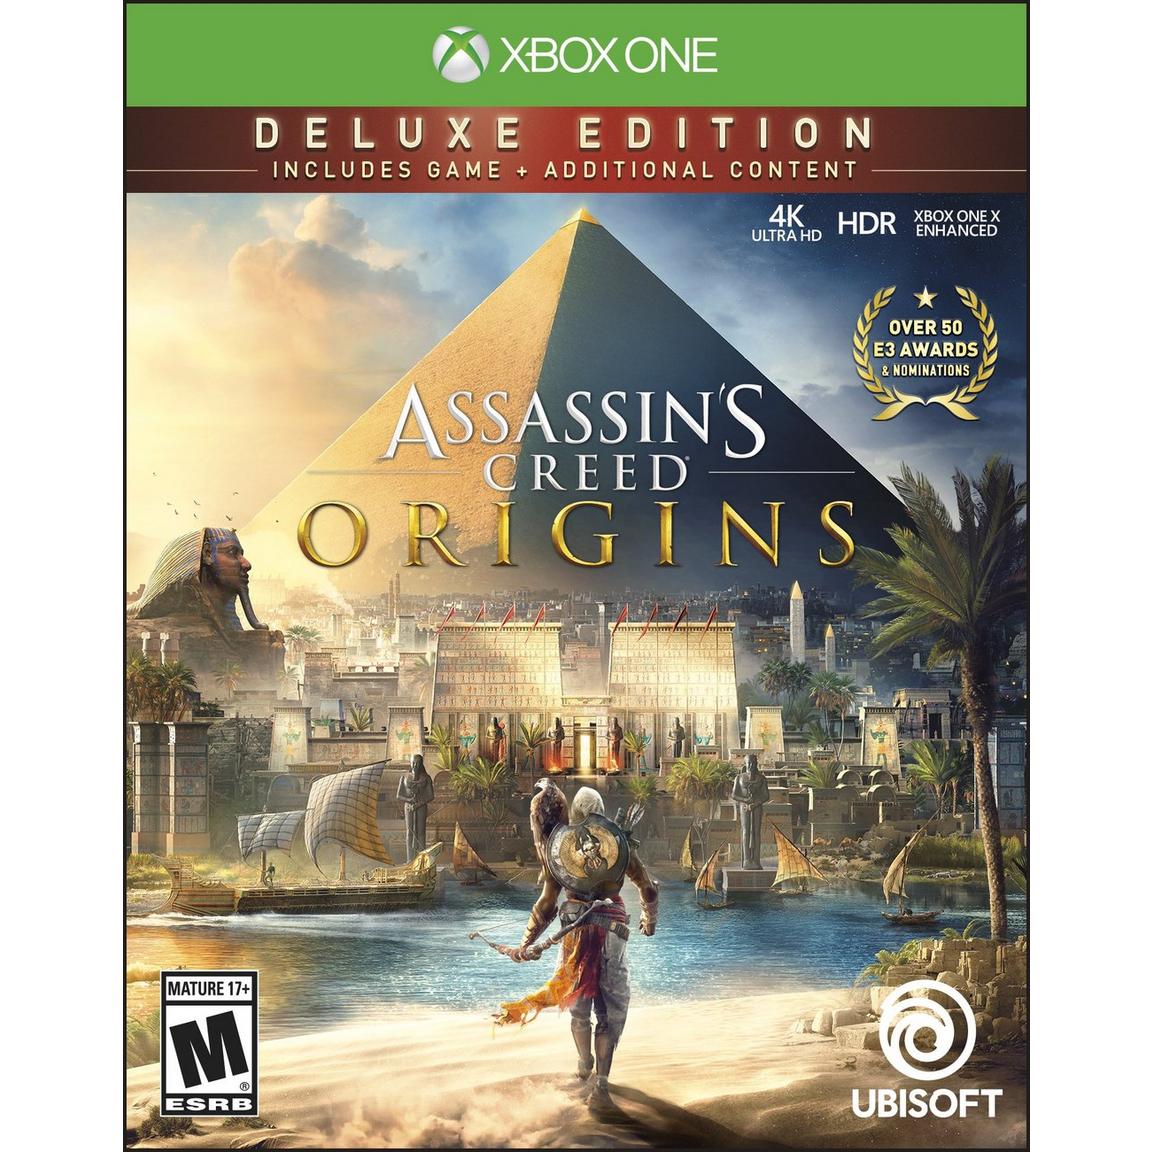 Assassin's Creed Origins Deluxe Edition - Xbox One -  Ubisoft, G3Q-00345